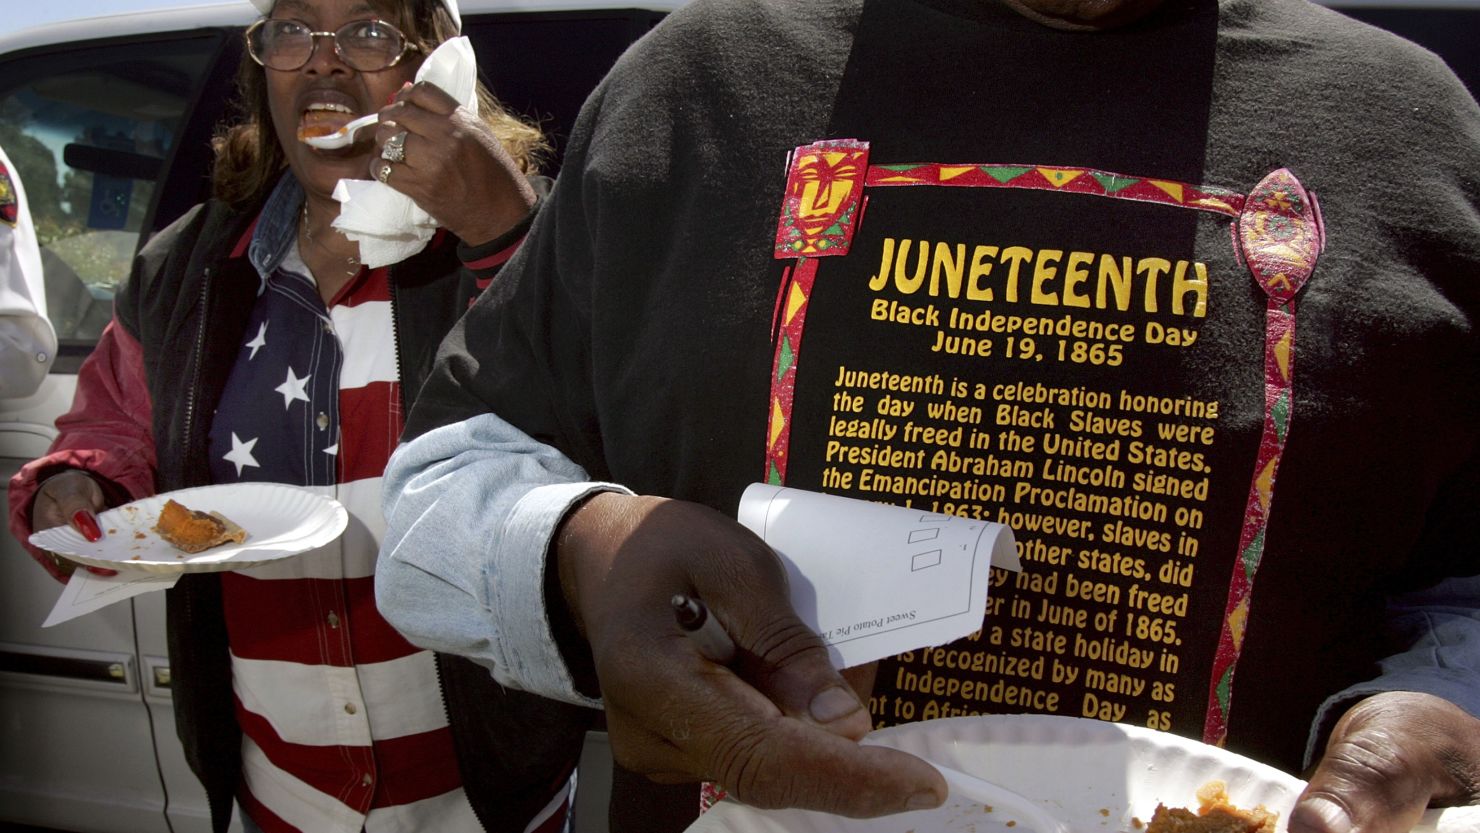 Naomi Williams, left, and D'Emanuel Grosse Sr. taste the sweet potato pie entered in the cook-off contest at the Juneteenth Black Independence Day celebrations in Richmond, California on Wednesday.